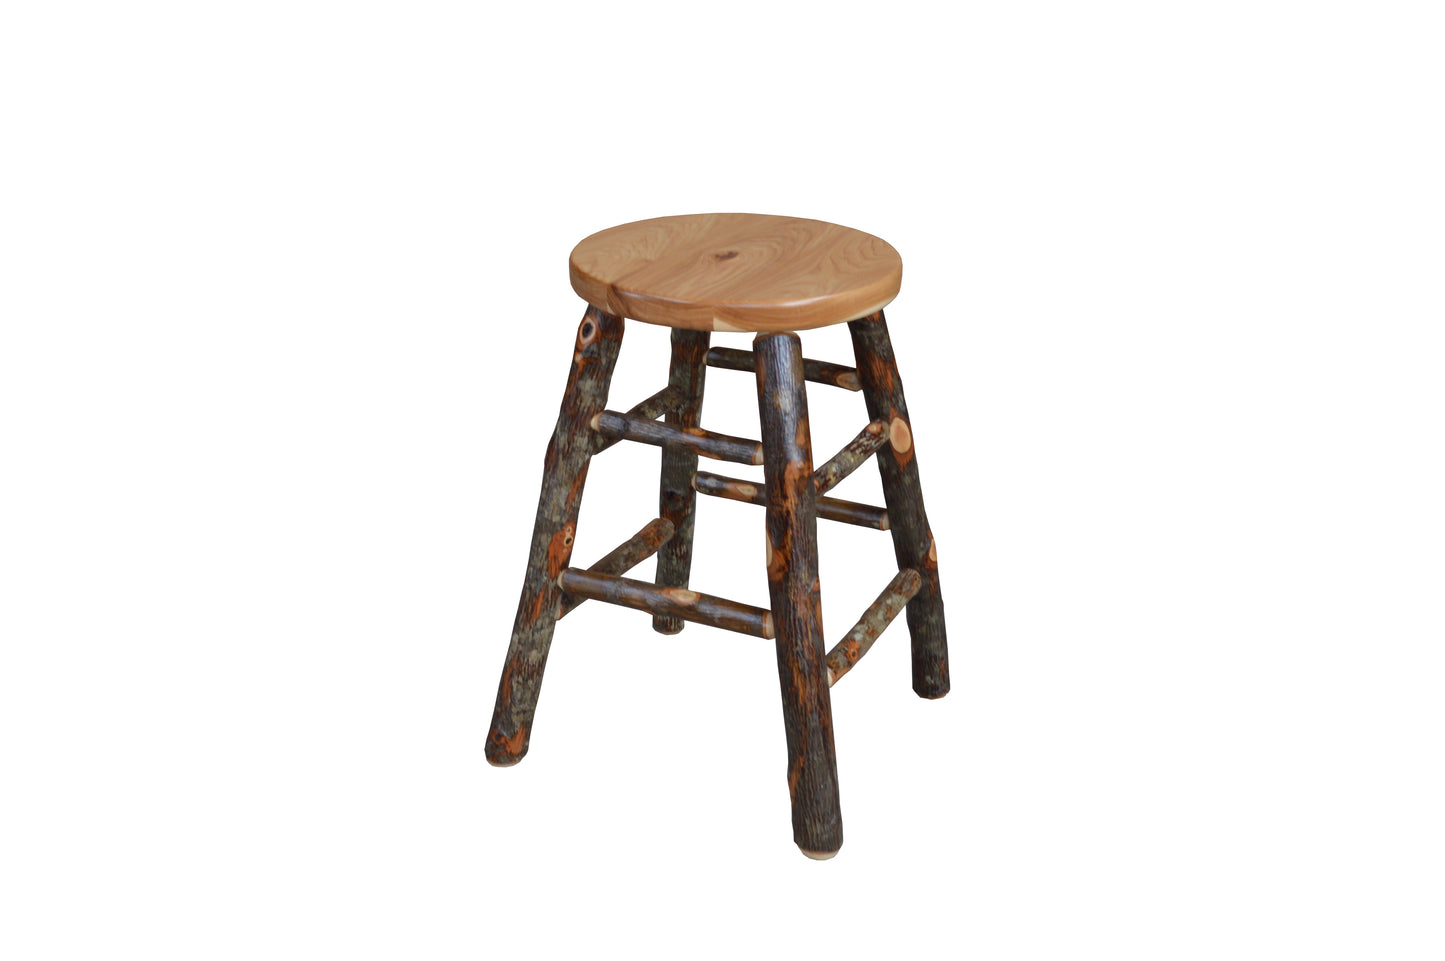 A&L Furniture Co. Hickory Counter Stool - LEAD TIME TO SHIP 10 BUSINESS DAYS